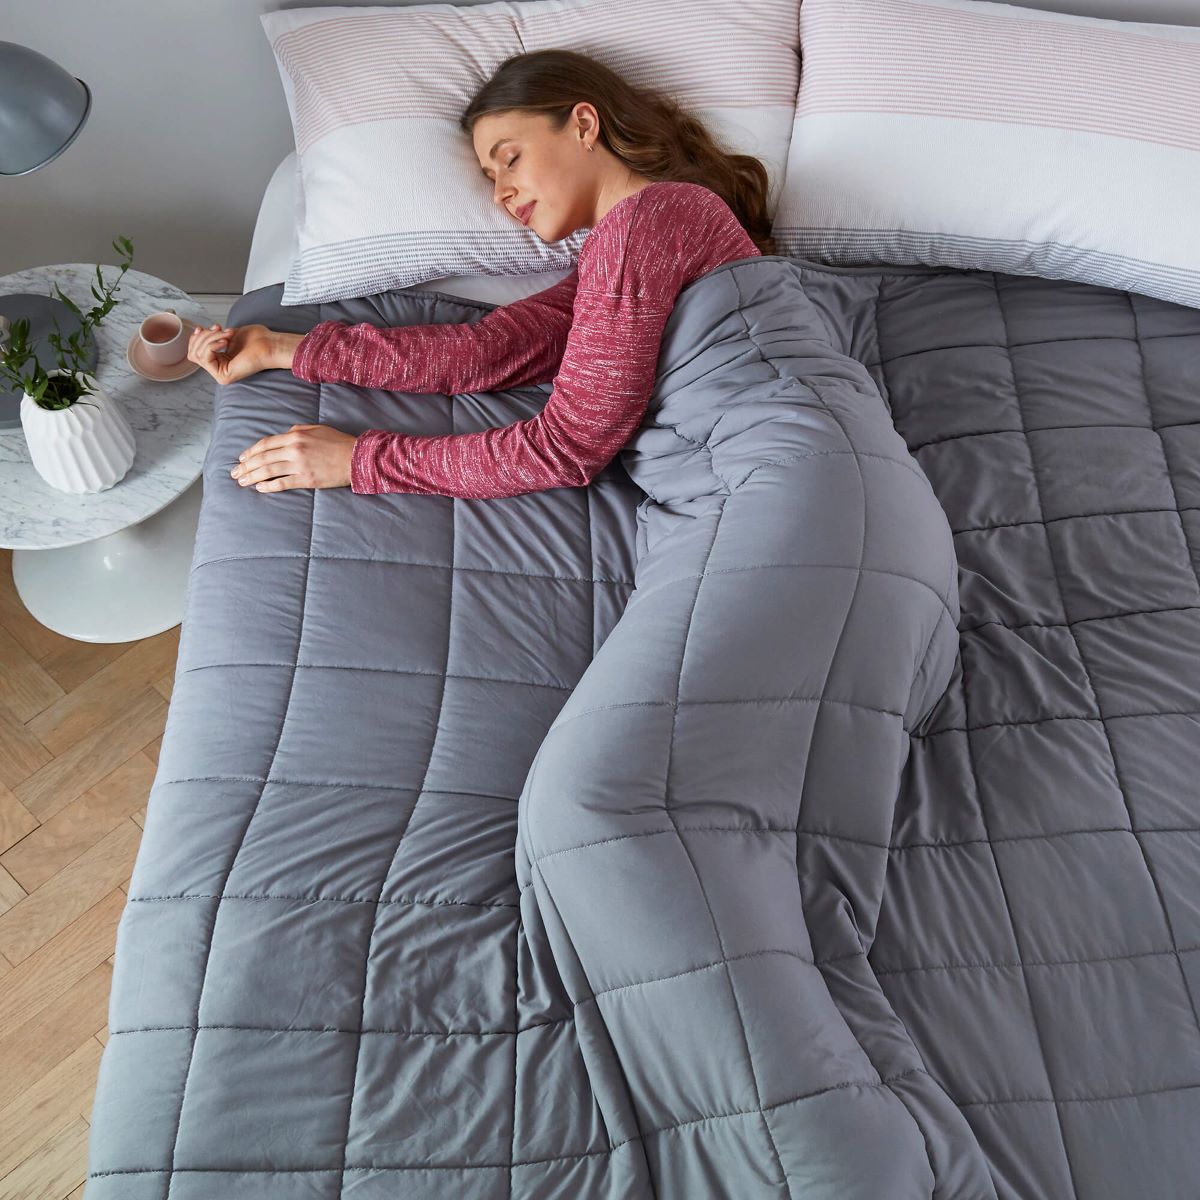 what-is-in-a-weighted-blanket